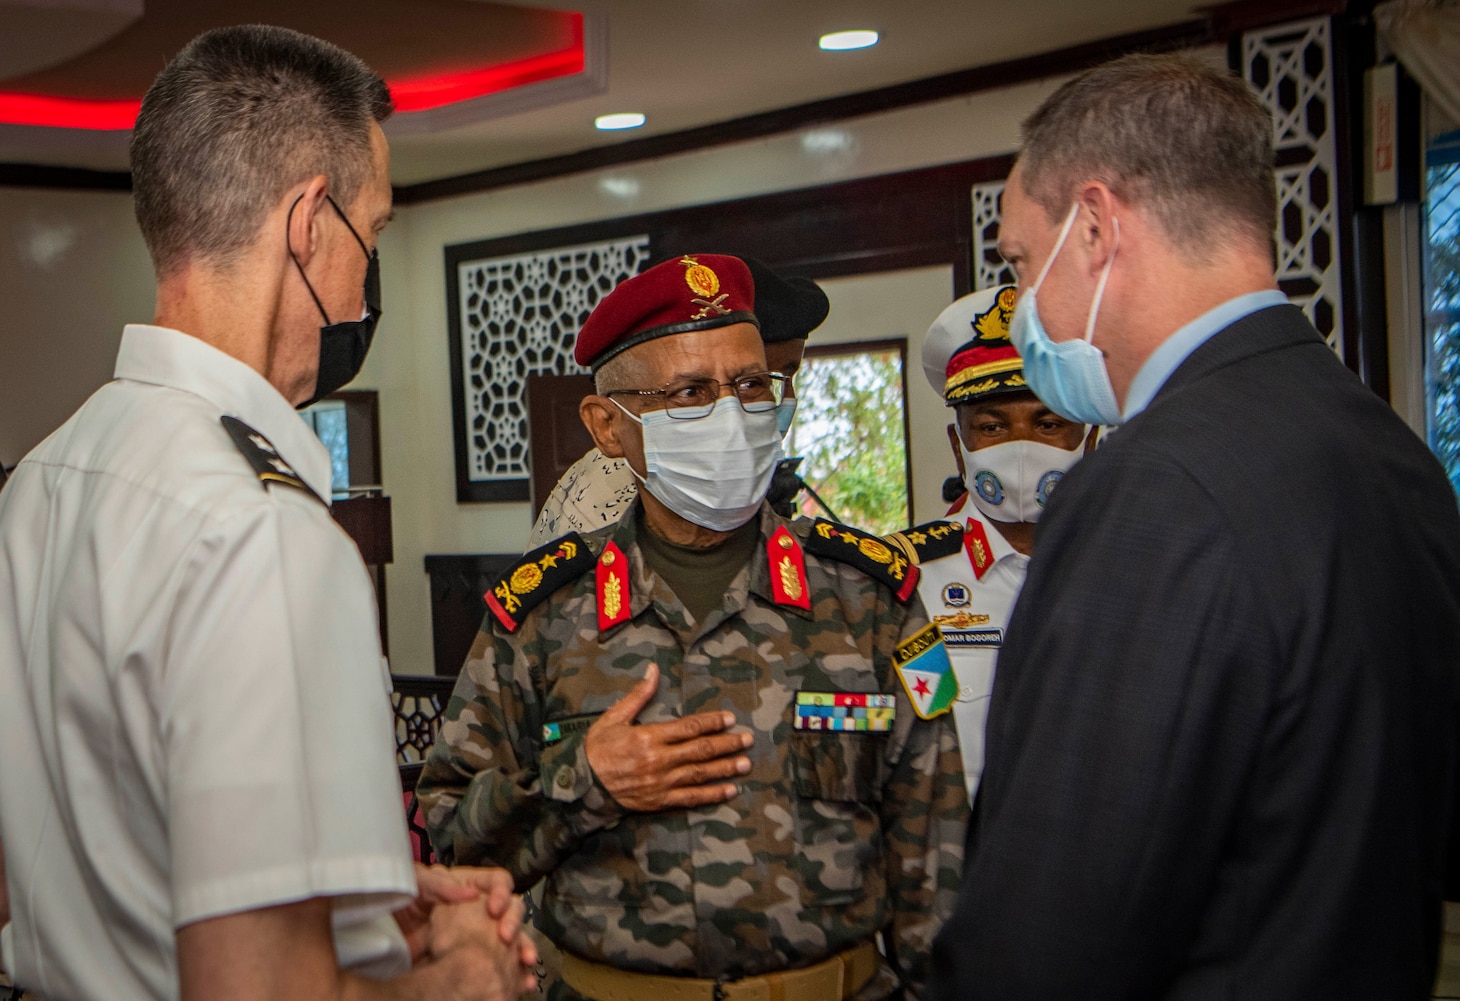 (July 25, 2021) Gen. William Zana, Combined Joint Task Force-Horn of Africa commanding general, left, and John Pratt, U.S. ambassador to Djibouti, right, speaks with Gen. Zakaria Sheikh, commander of Djiboutian Defense Forces, during the exercise Cutlass Express 2021 opening ceremony held at the Doraleh Coast Guard training center, in Djibouti, Djibouti, July 25, 2021. Cutlass Express is designed to improve regional cooperation, maritime domain awareness and information sharing practices to increase capabilities between the U.S., East African and Western Indian Ocean nations to counter illicit maritime activity.